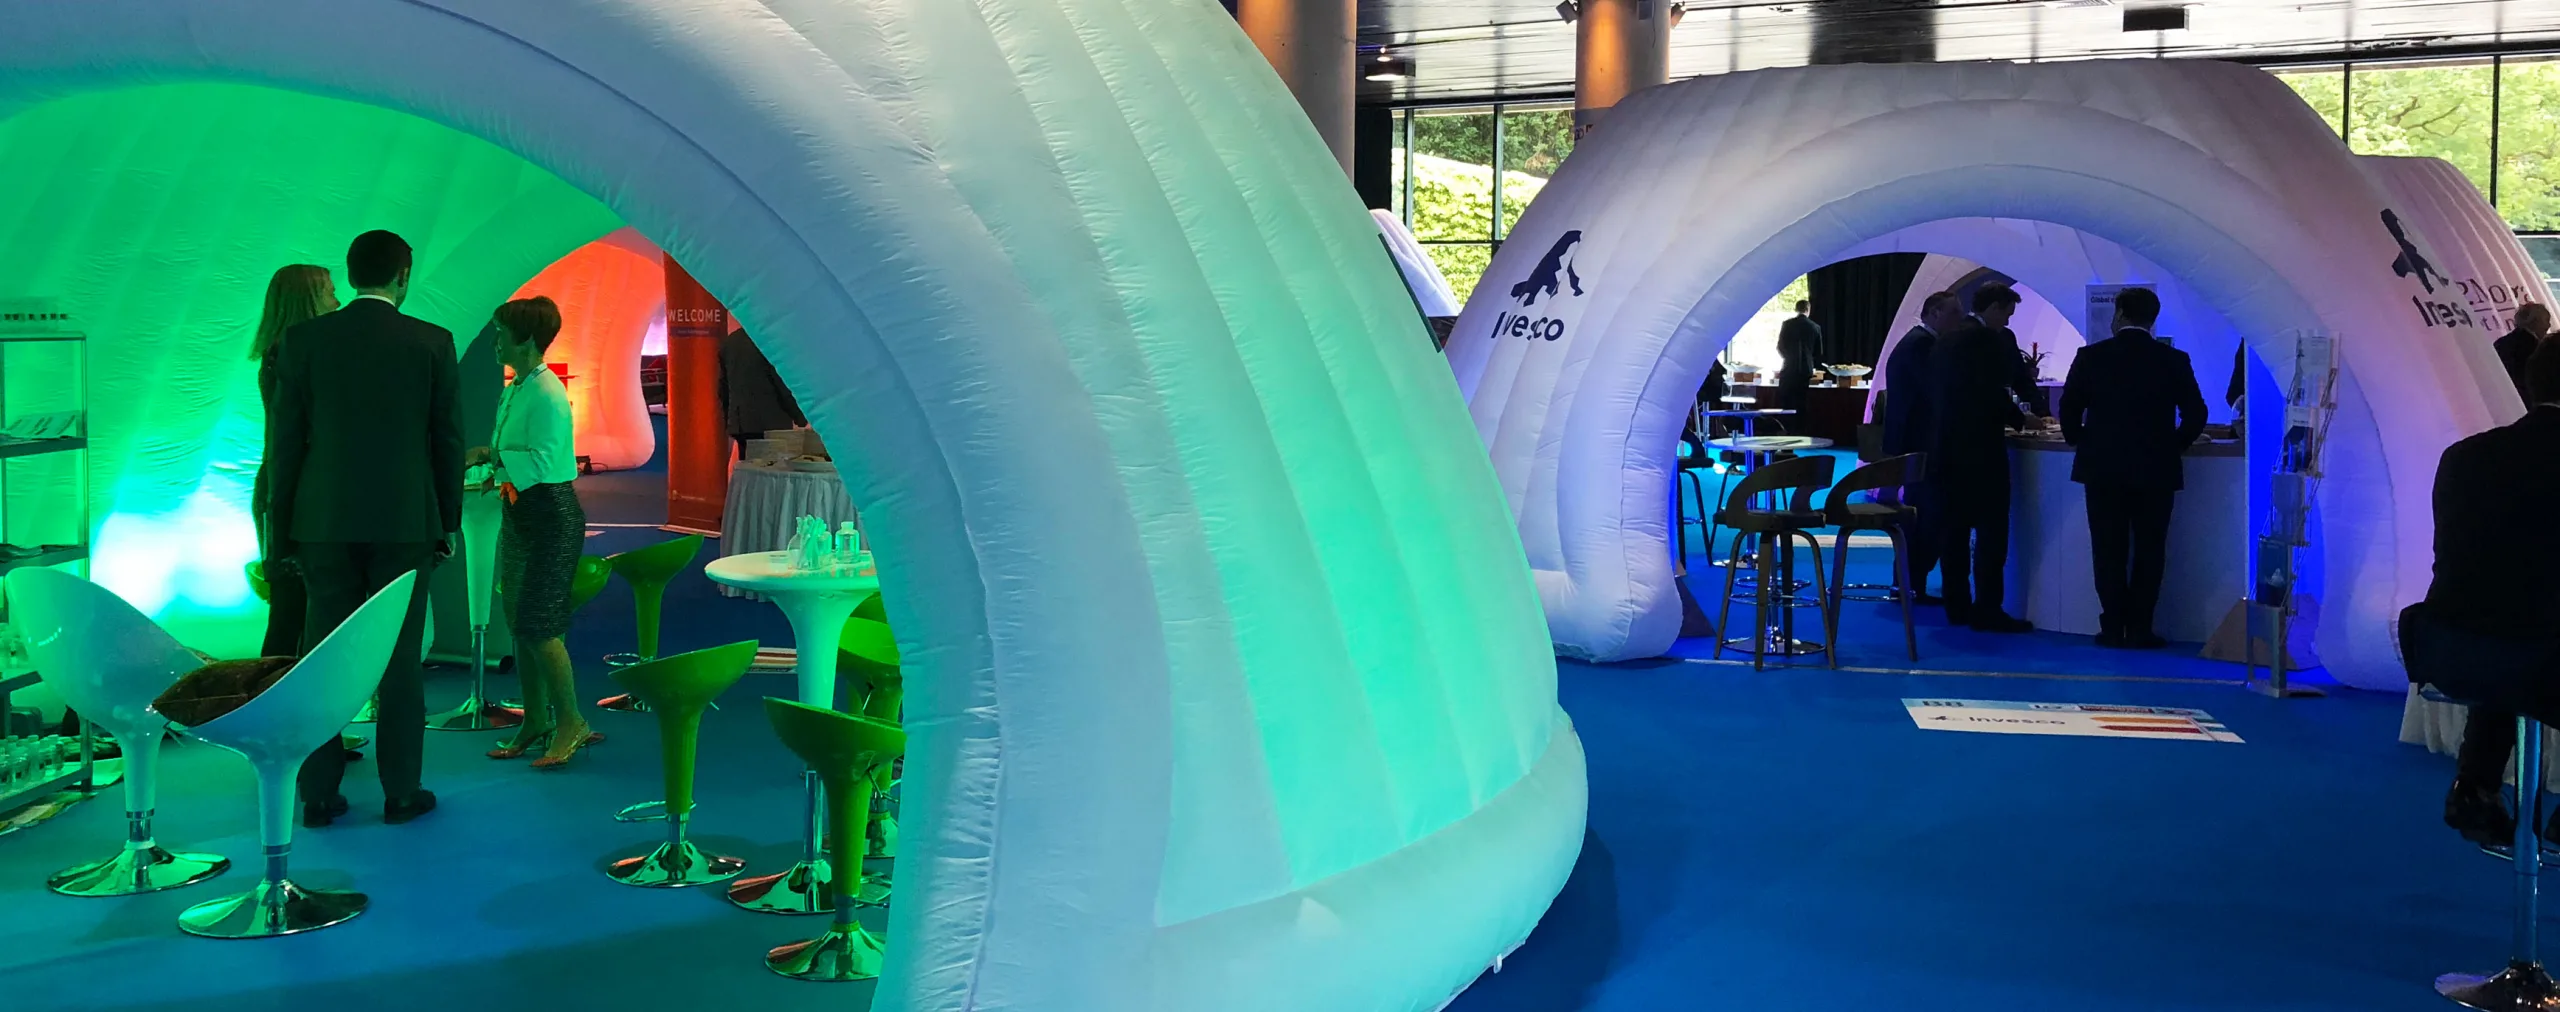 Pic showing two Created By Air modular inflatable Panoramic structures. Each with separate zone colour lighting